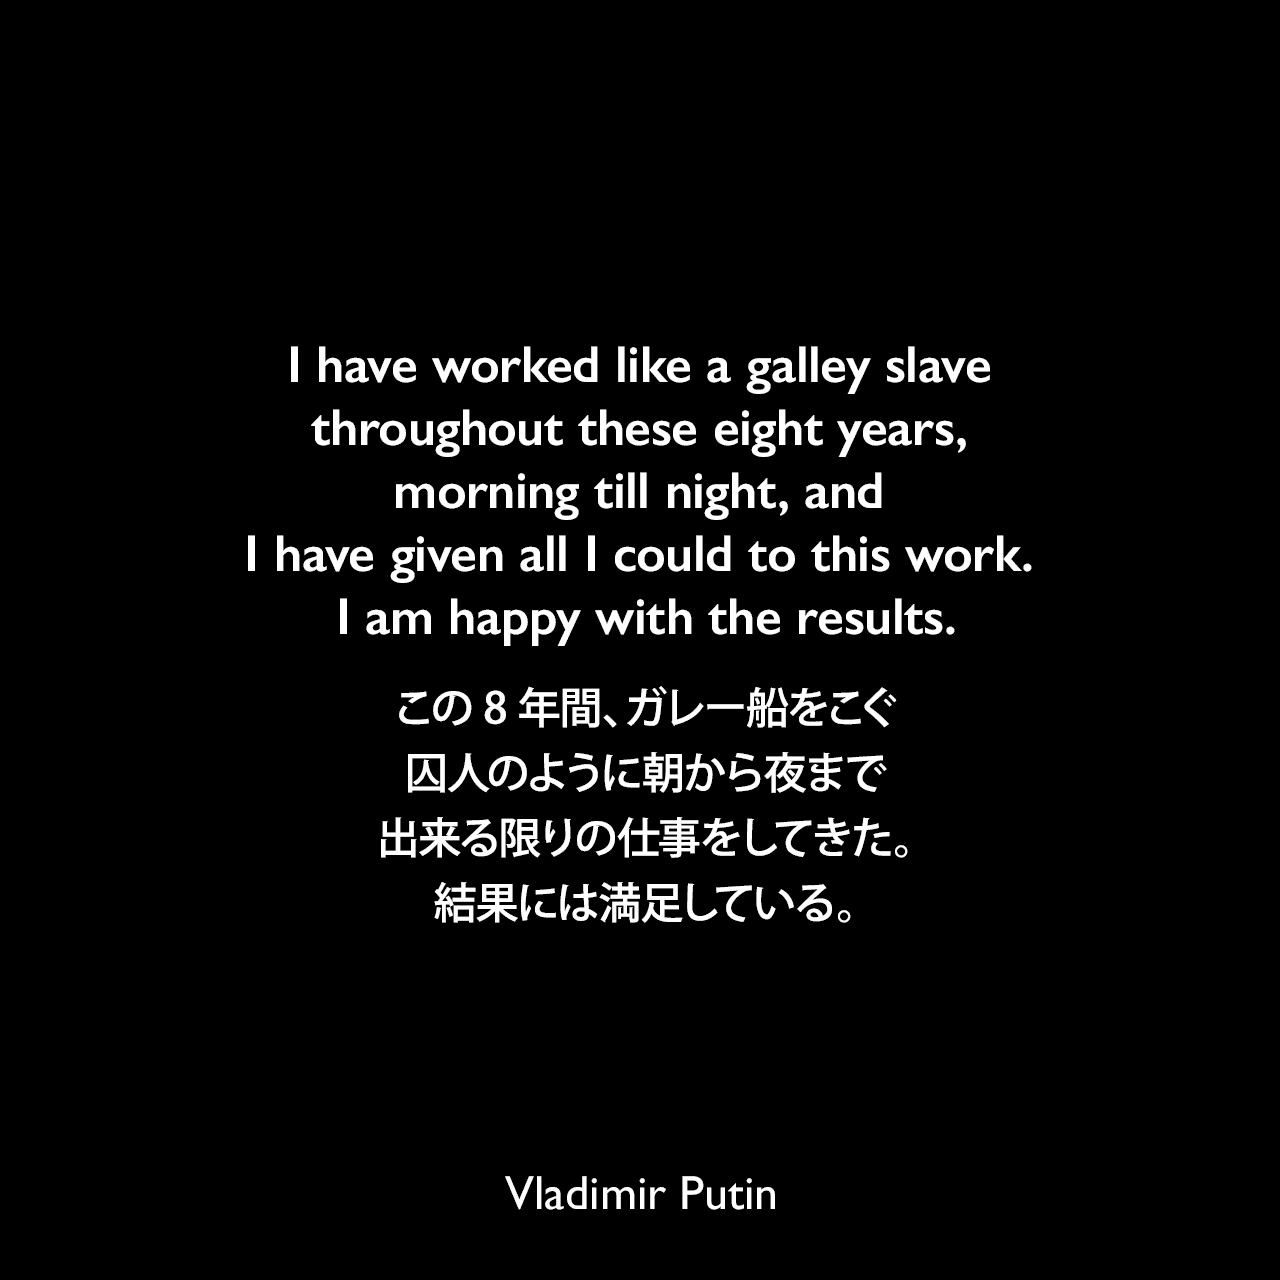 I have worked like a galley slave throughout these eight years, morning till night, and I have given all I could to this work. I am happy with the results.この8年間、ガレー船をこぐ囚人のように朝から夜まで出来る限りの仕事をしてきた。結果には満足している。- エイミー・ナイトによる本「The Truth About Putin and Medvedev」よりVladimir Putin